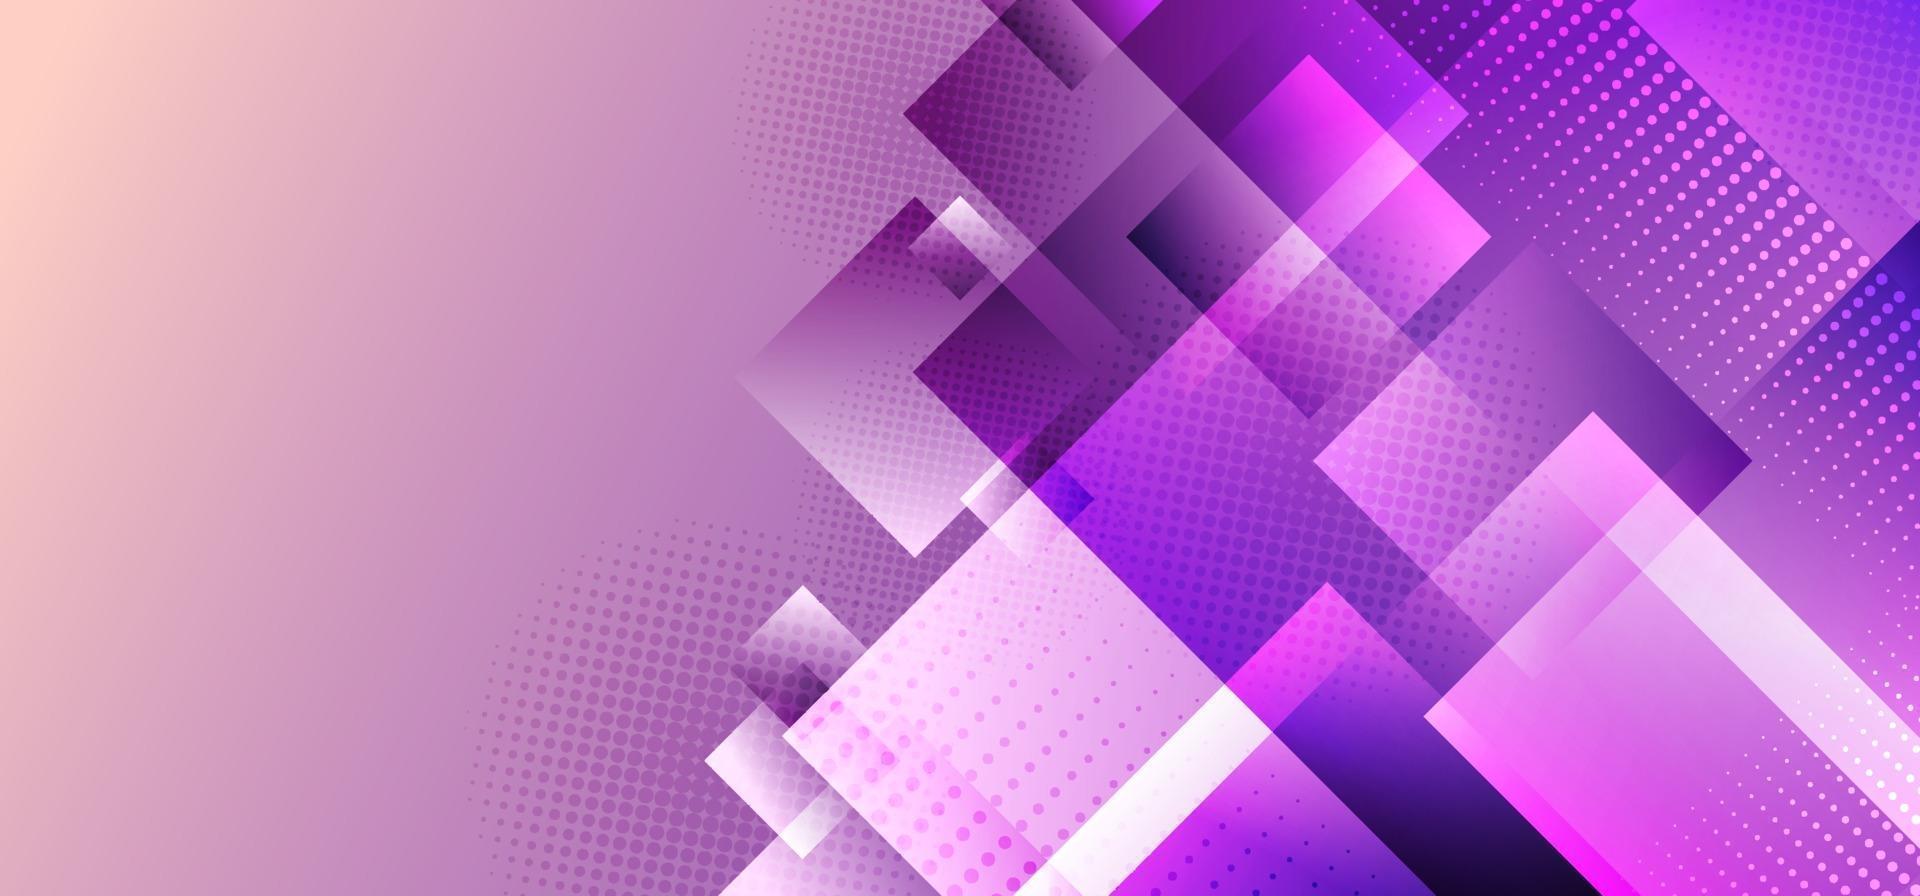 Abstract purple squares geometric overlapping layers with glowing light background vector